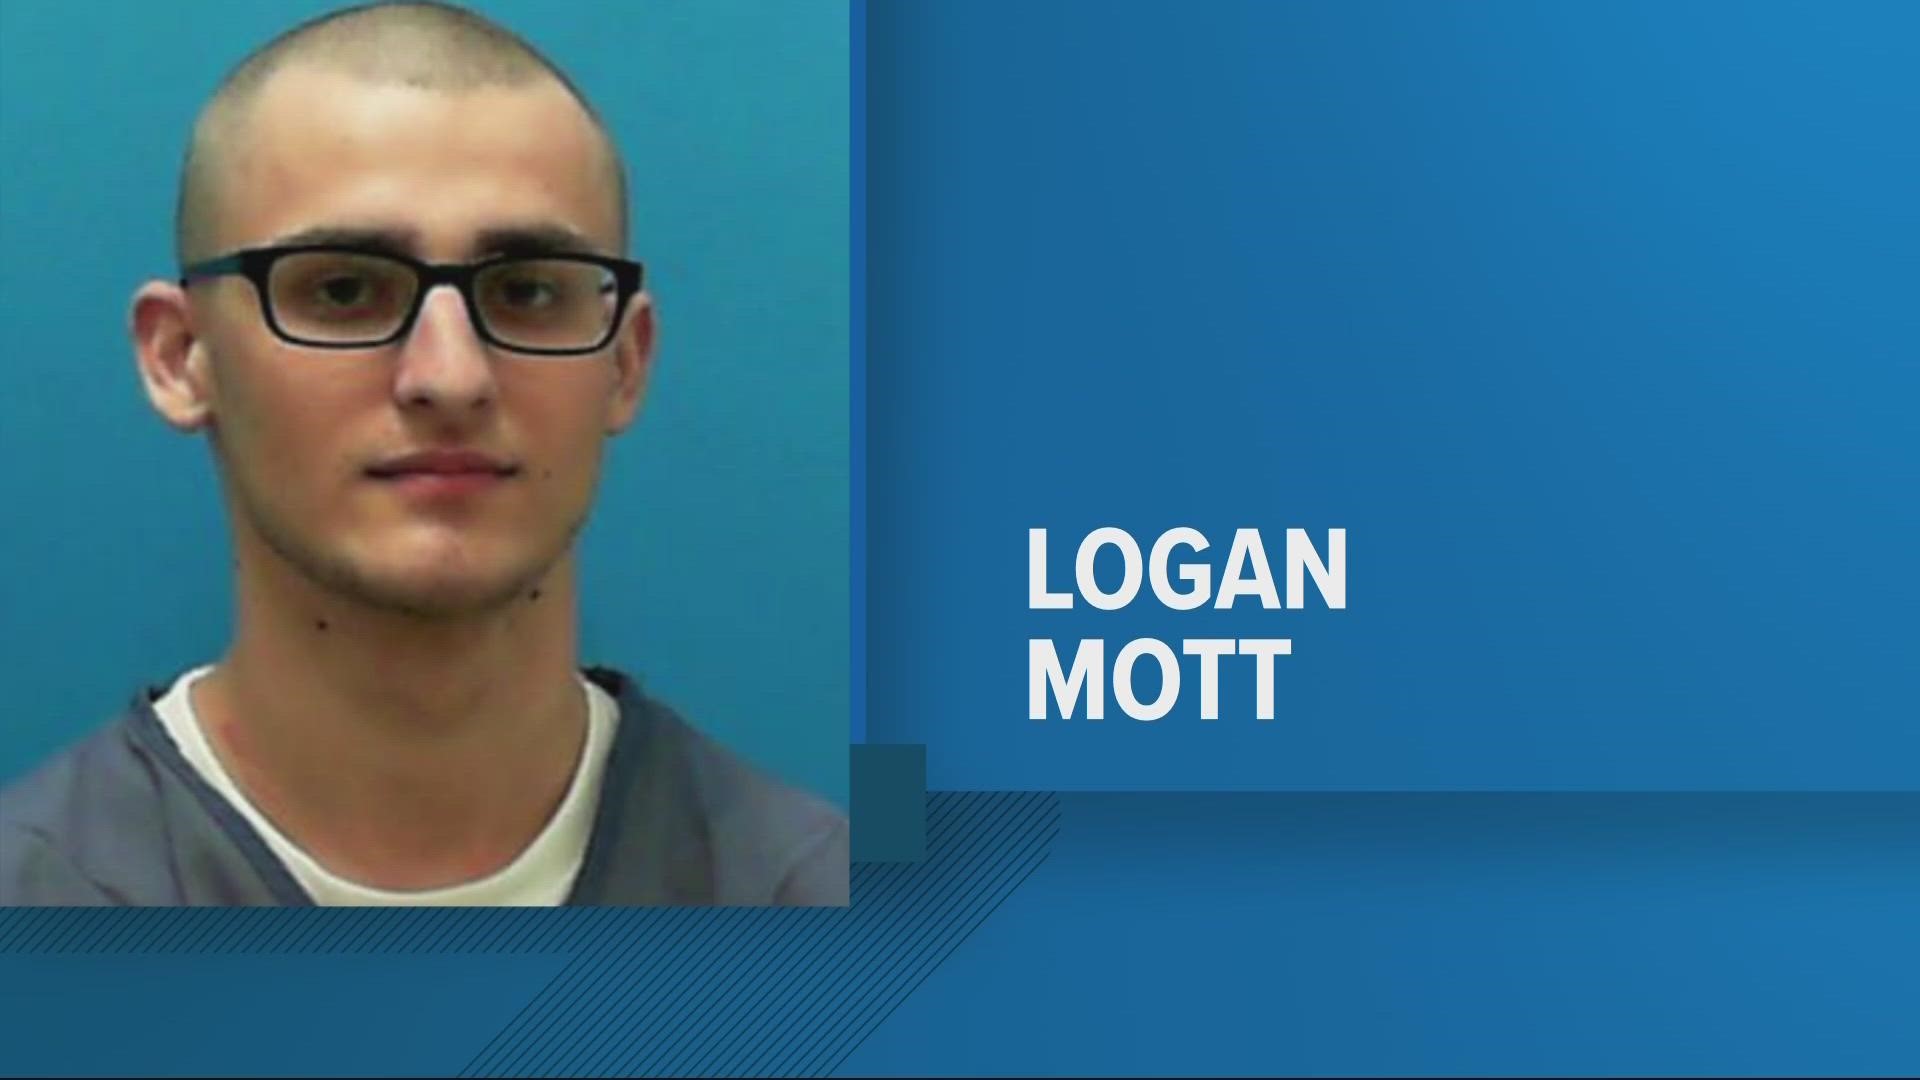 Logan Mott faces additional years in prison for violating the terms of his sentence in making alcohol in his cell.